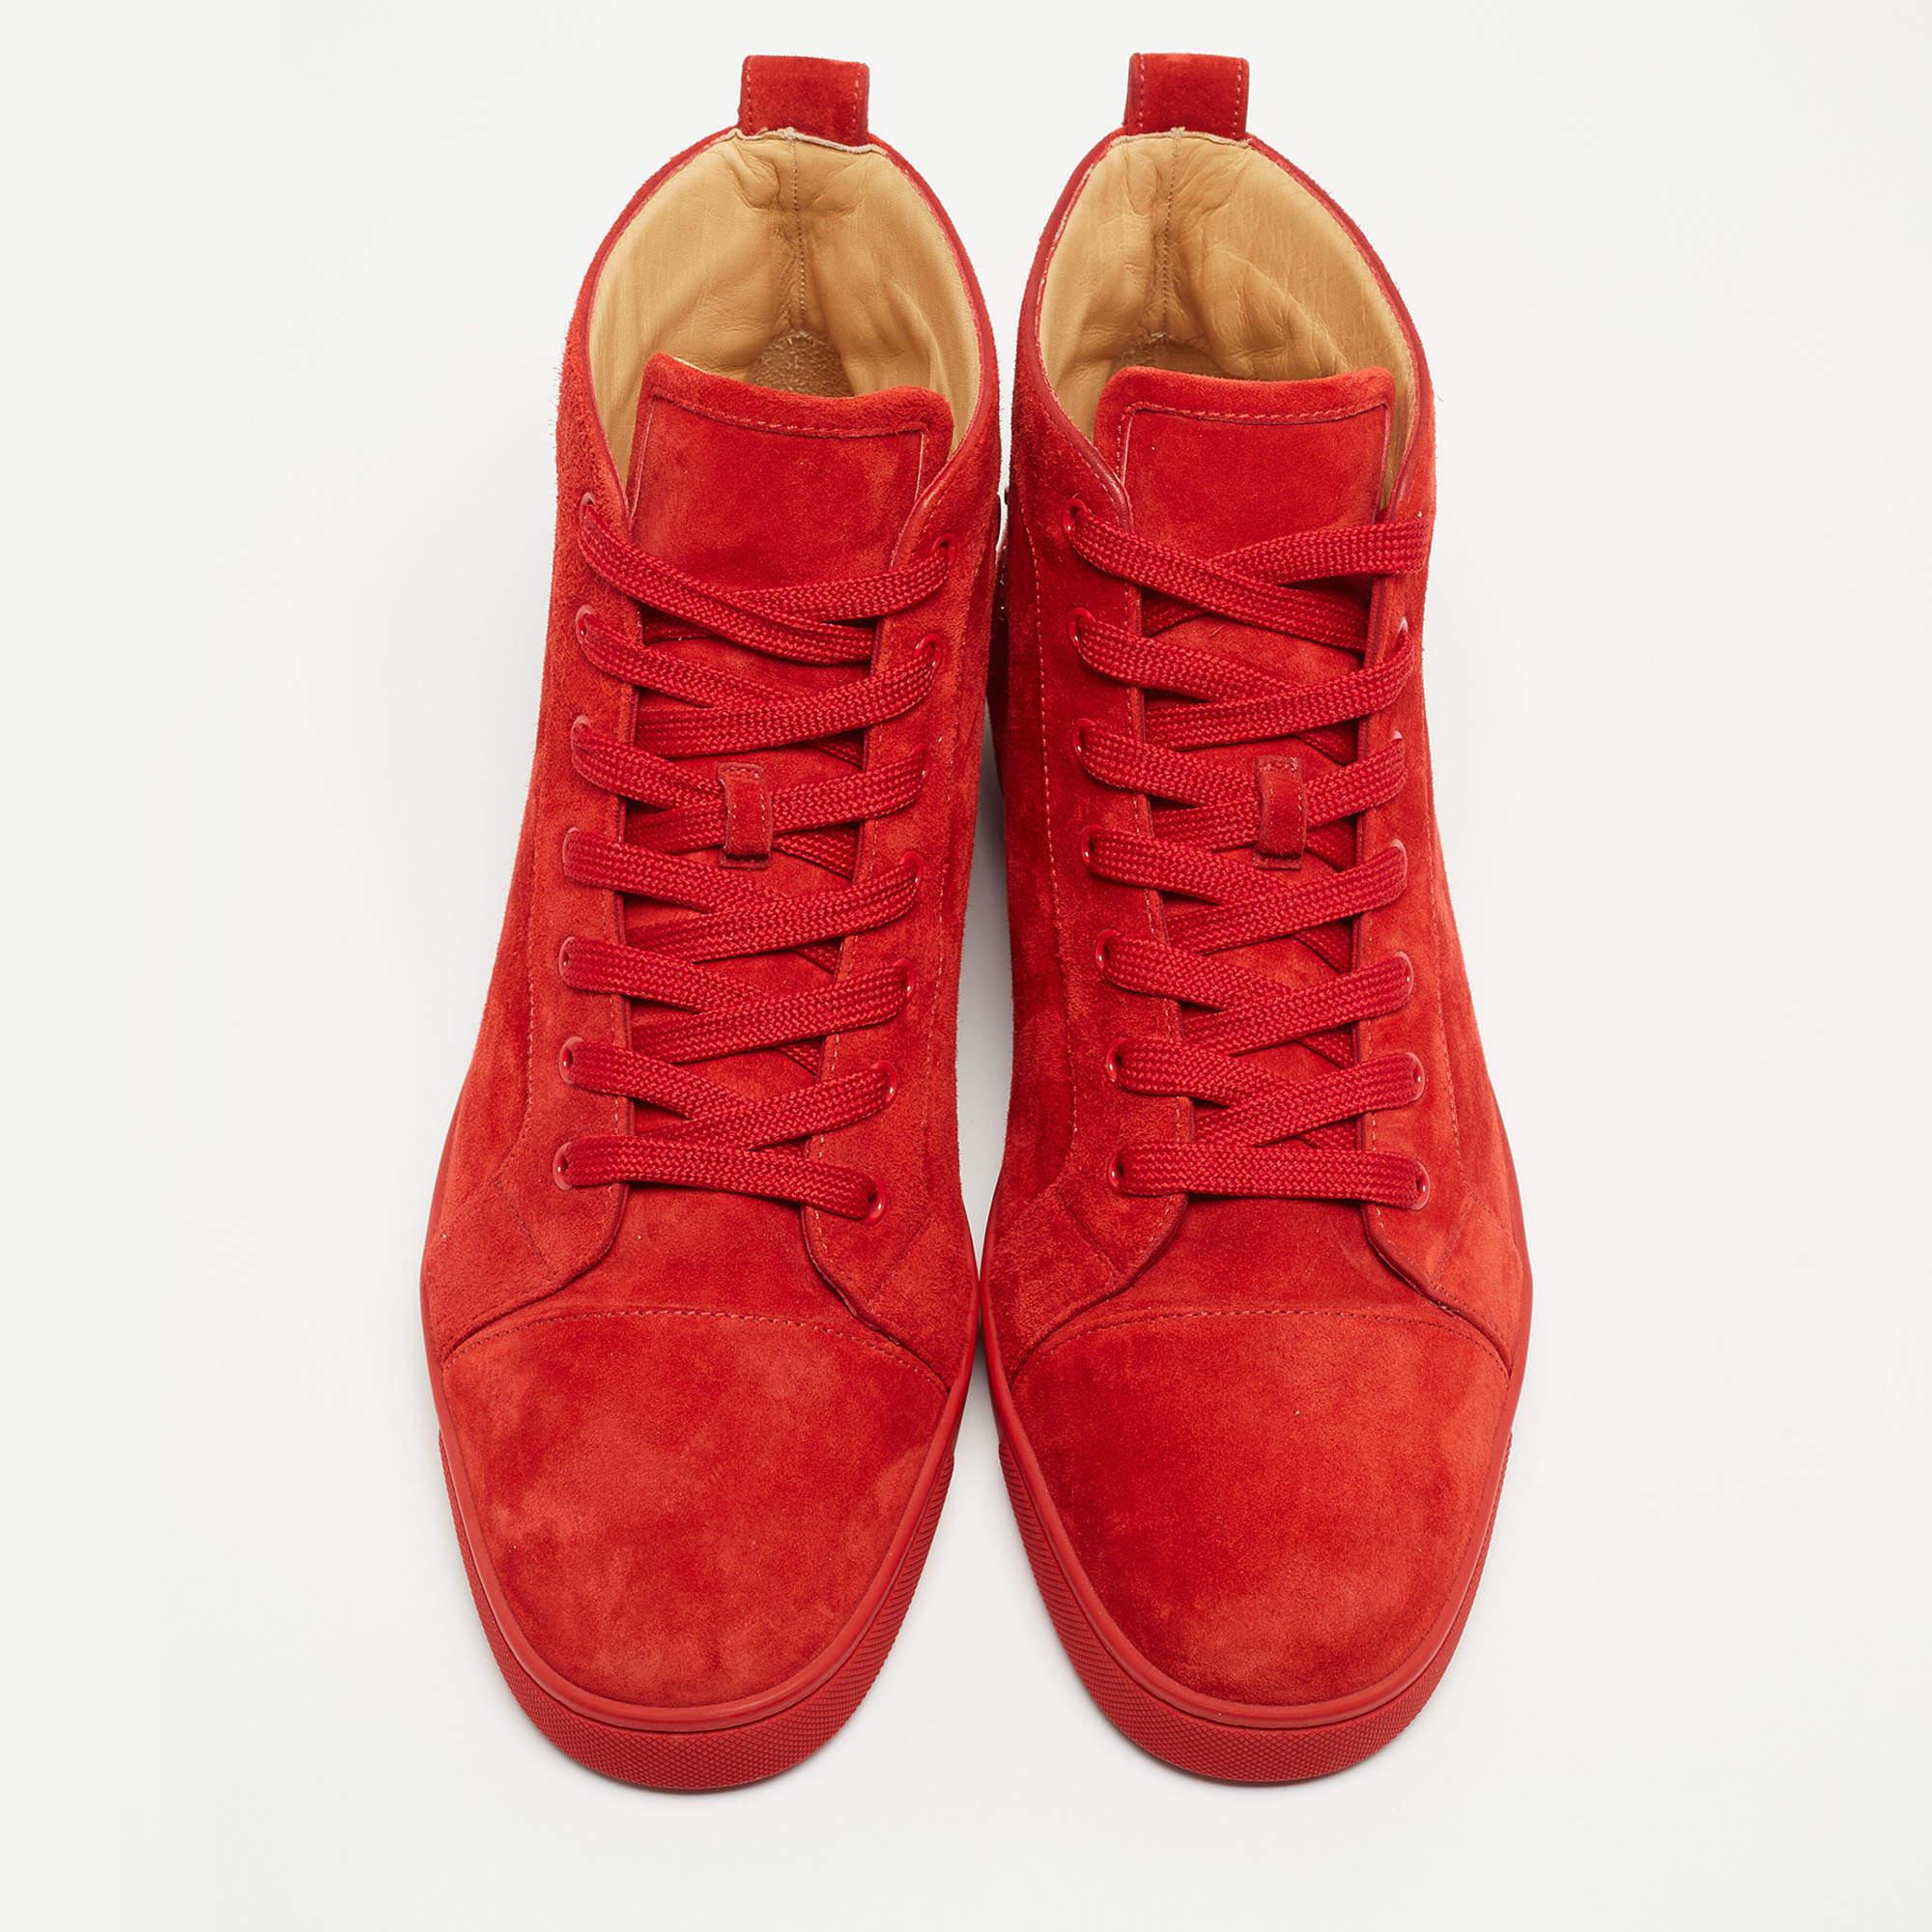 Christian Louboutin Red suede Louis High Top Sneakers Size 44.5 4